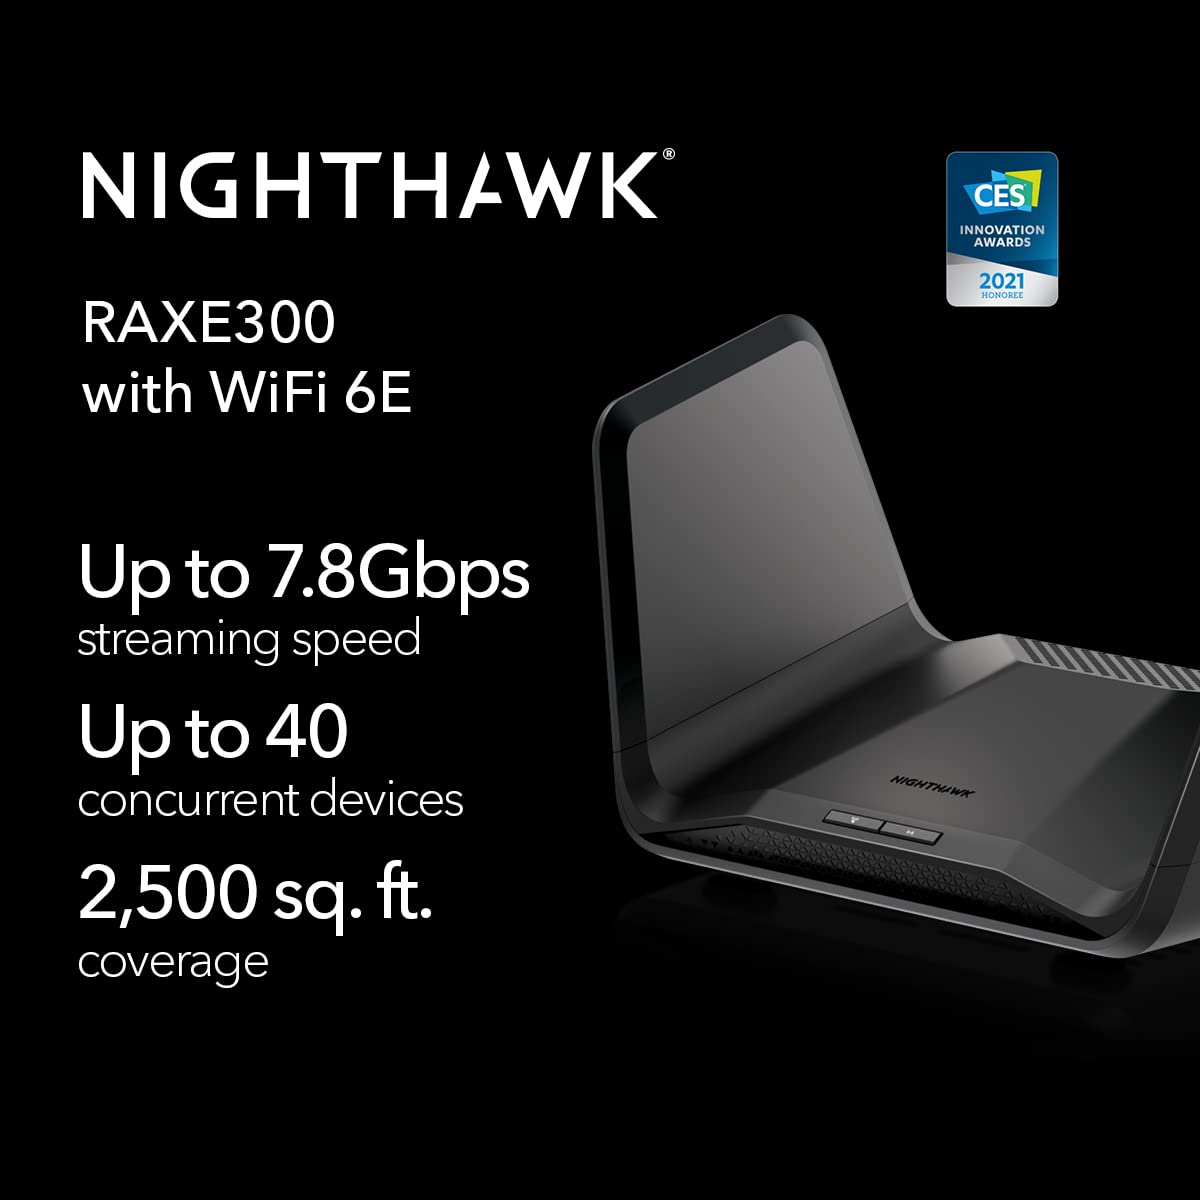 NETGEAR Nighthawk WiFi 6E Router (RAXE300) | AXE7800 Tri-Band Wireless Gigabit Speed (Up to 7.8Gbps) | New 6GHz Band | 8-Streams Cover up to 2,500 sq. ft., 40 Devices